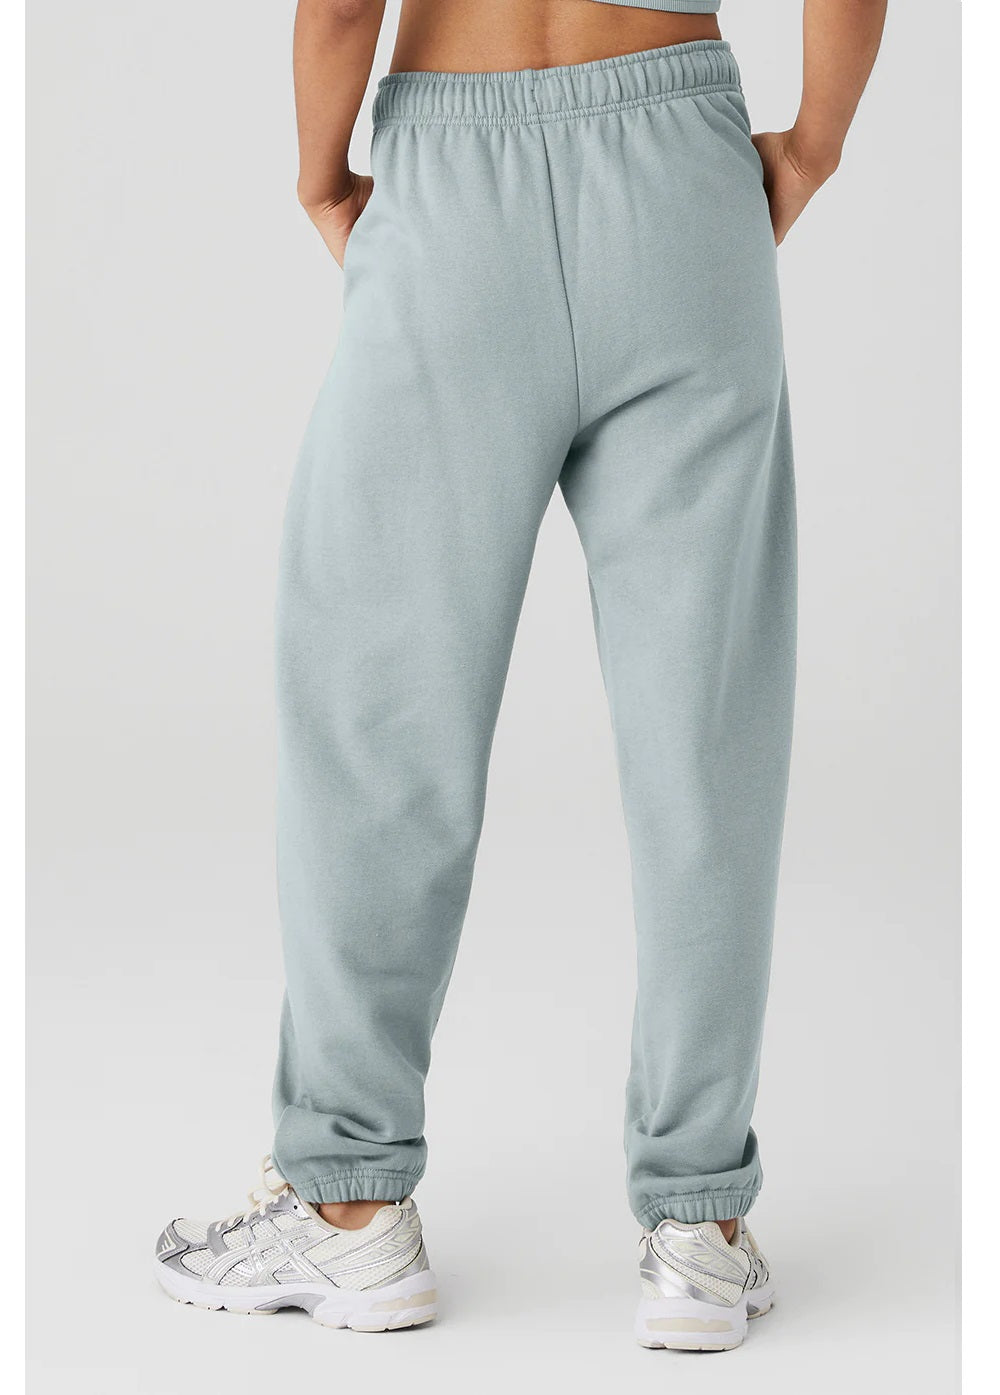 ACCOLADE SWEATPANT — Santa Fe Trail Outfitters